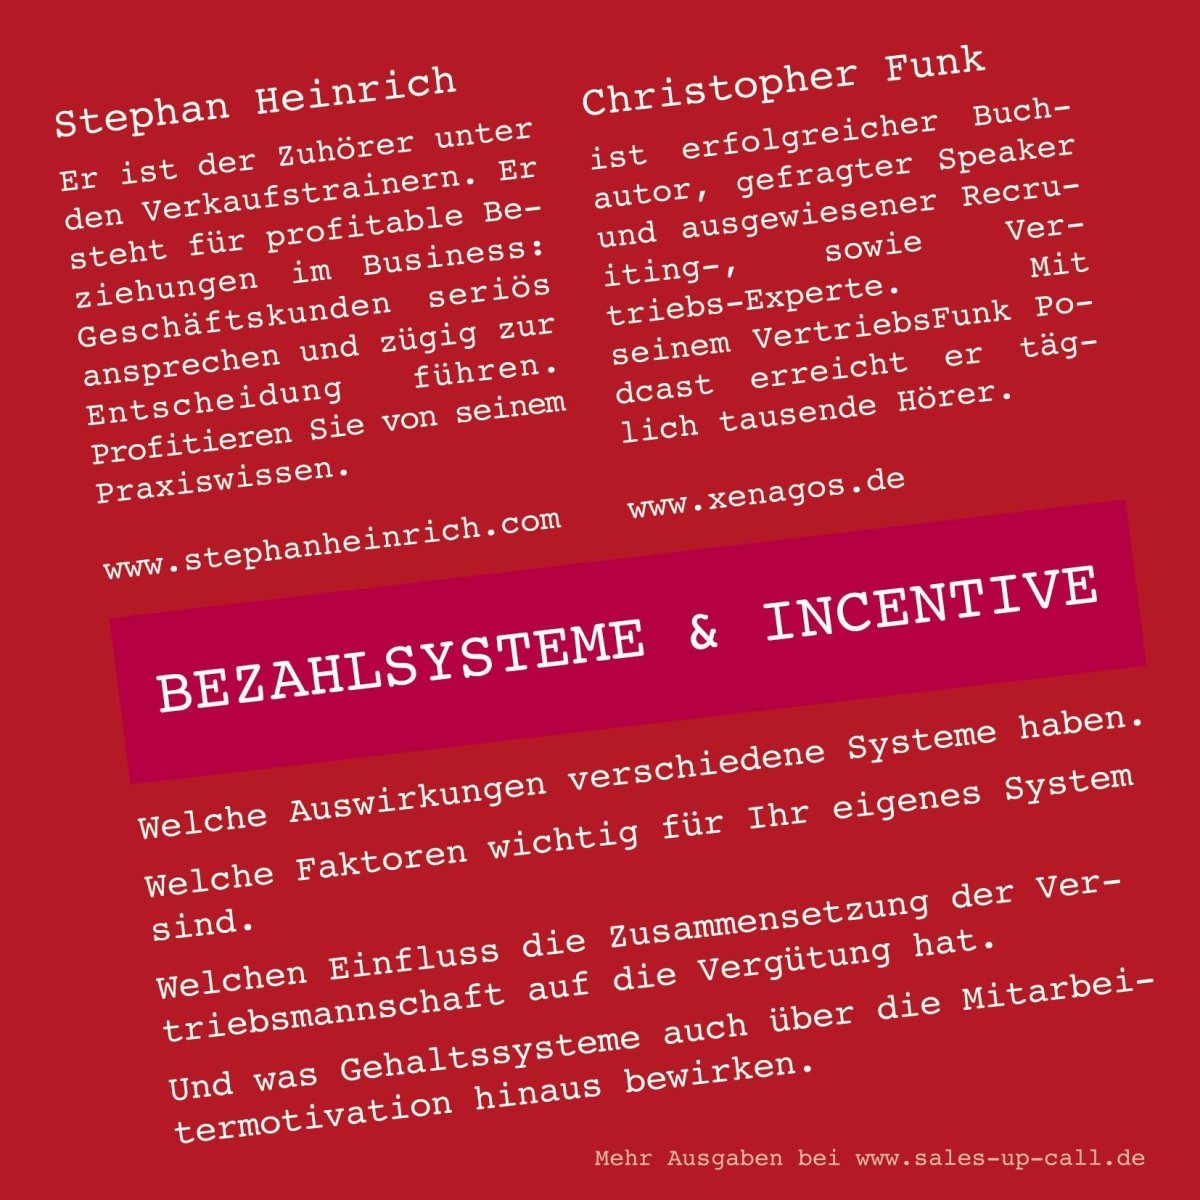 Bezahlsysteme & Incentive - Sales-up-Call - Stephan Heinrich